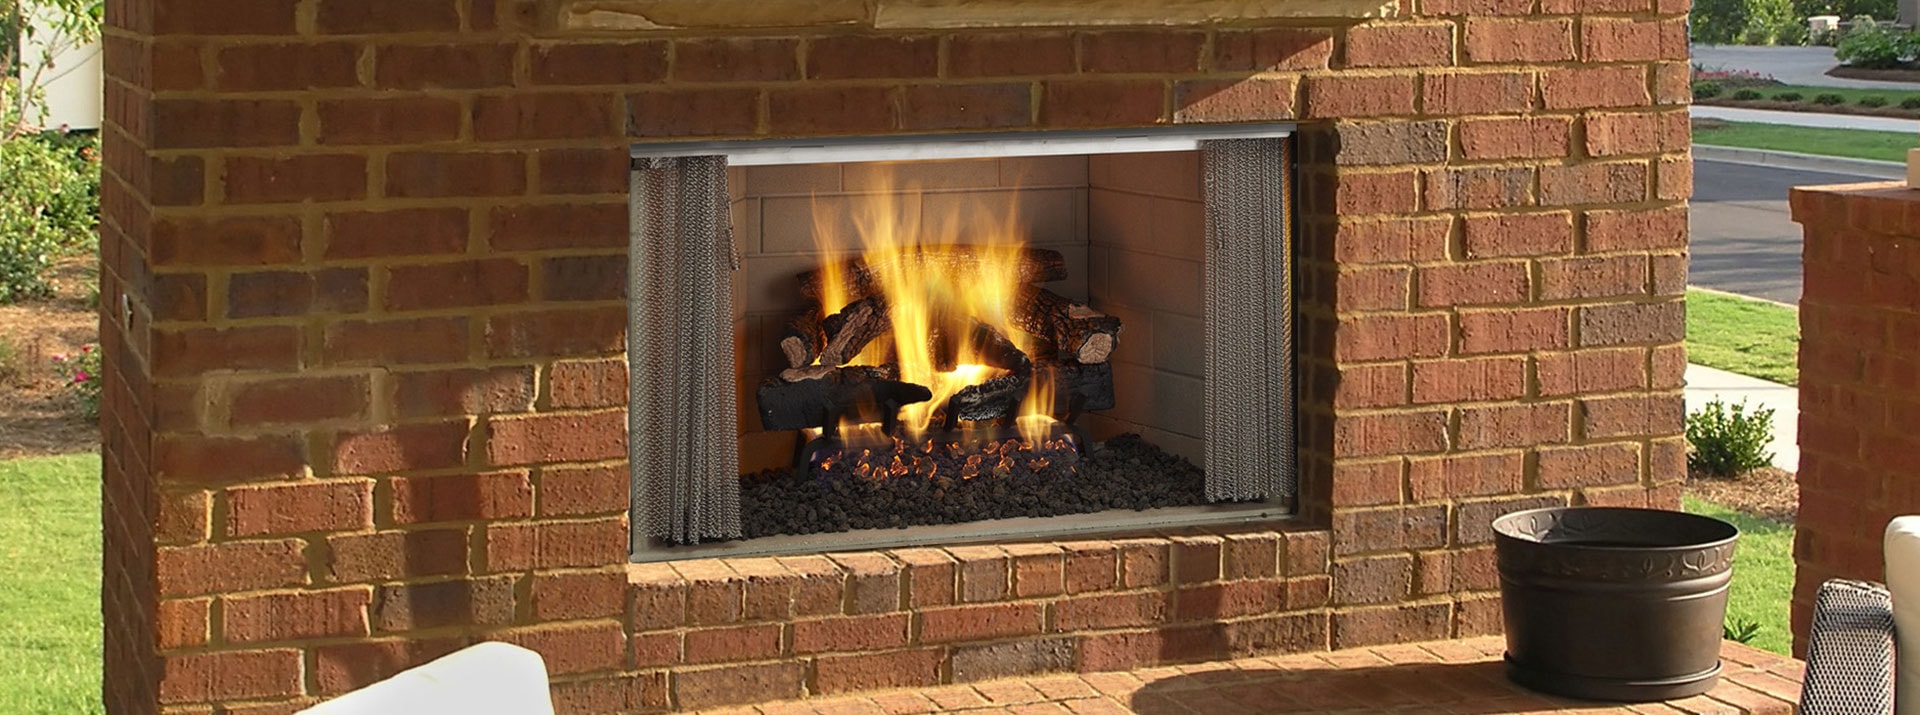 Back to Back Indoor Outdoor Fireplace Inspirational Villawood Wood Burning Outdoor Fireplace